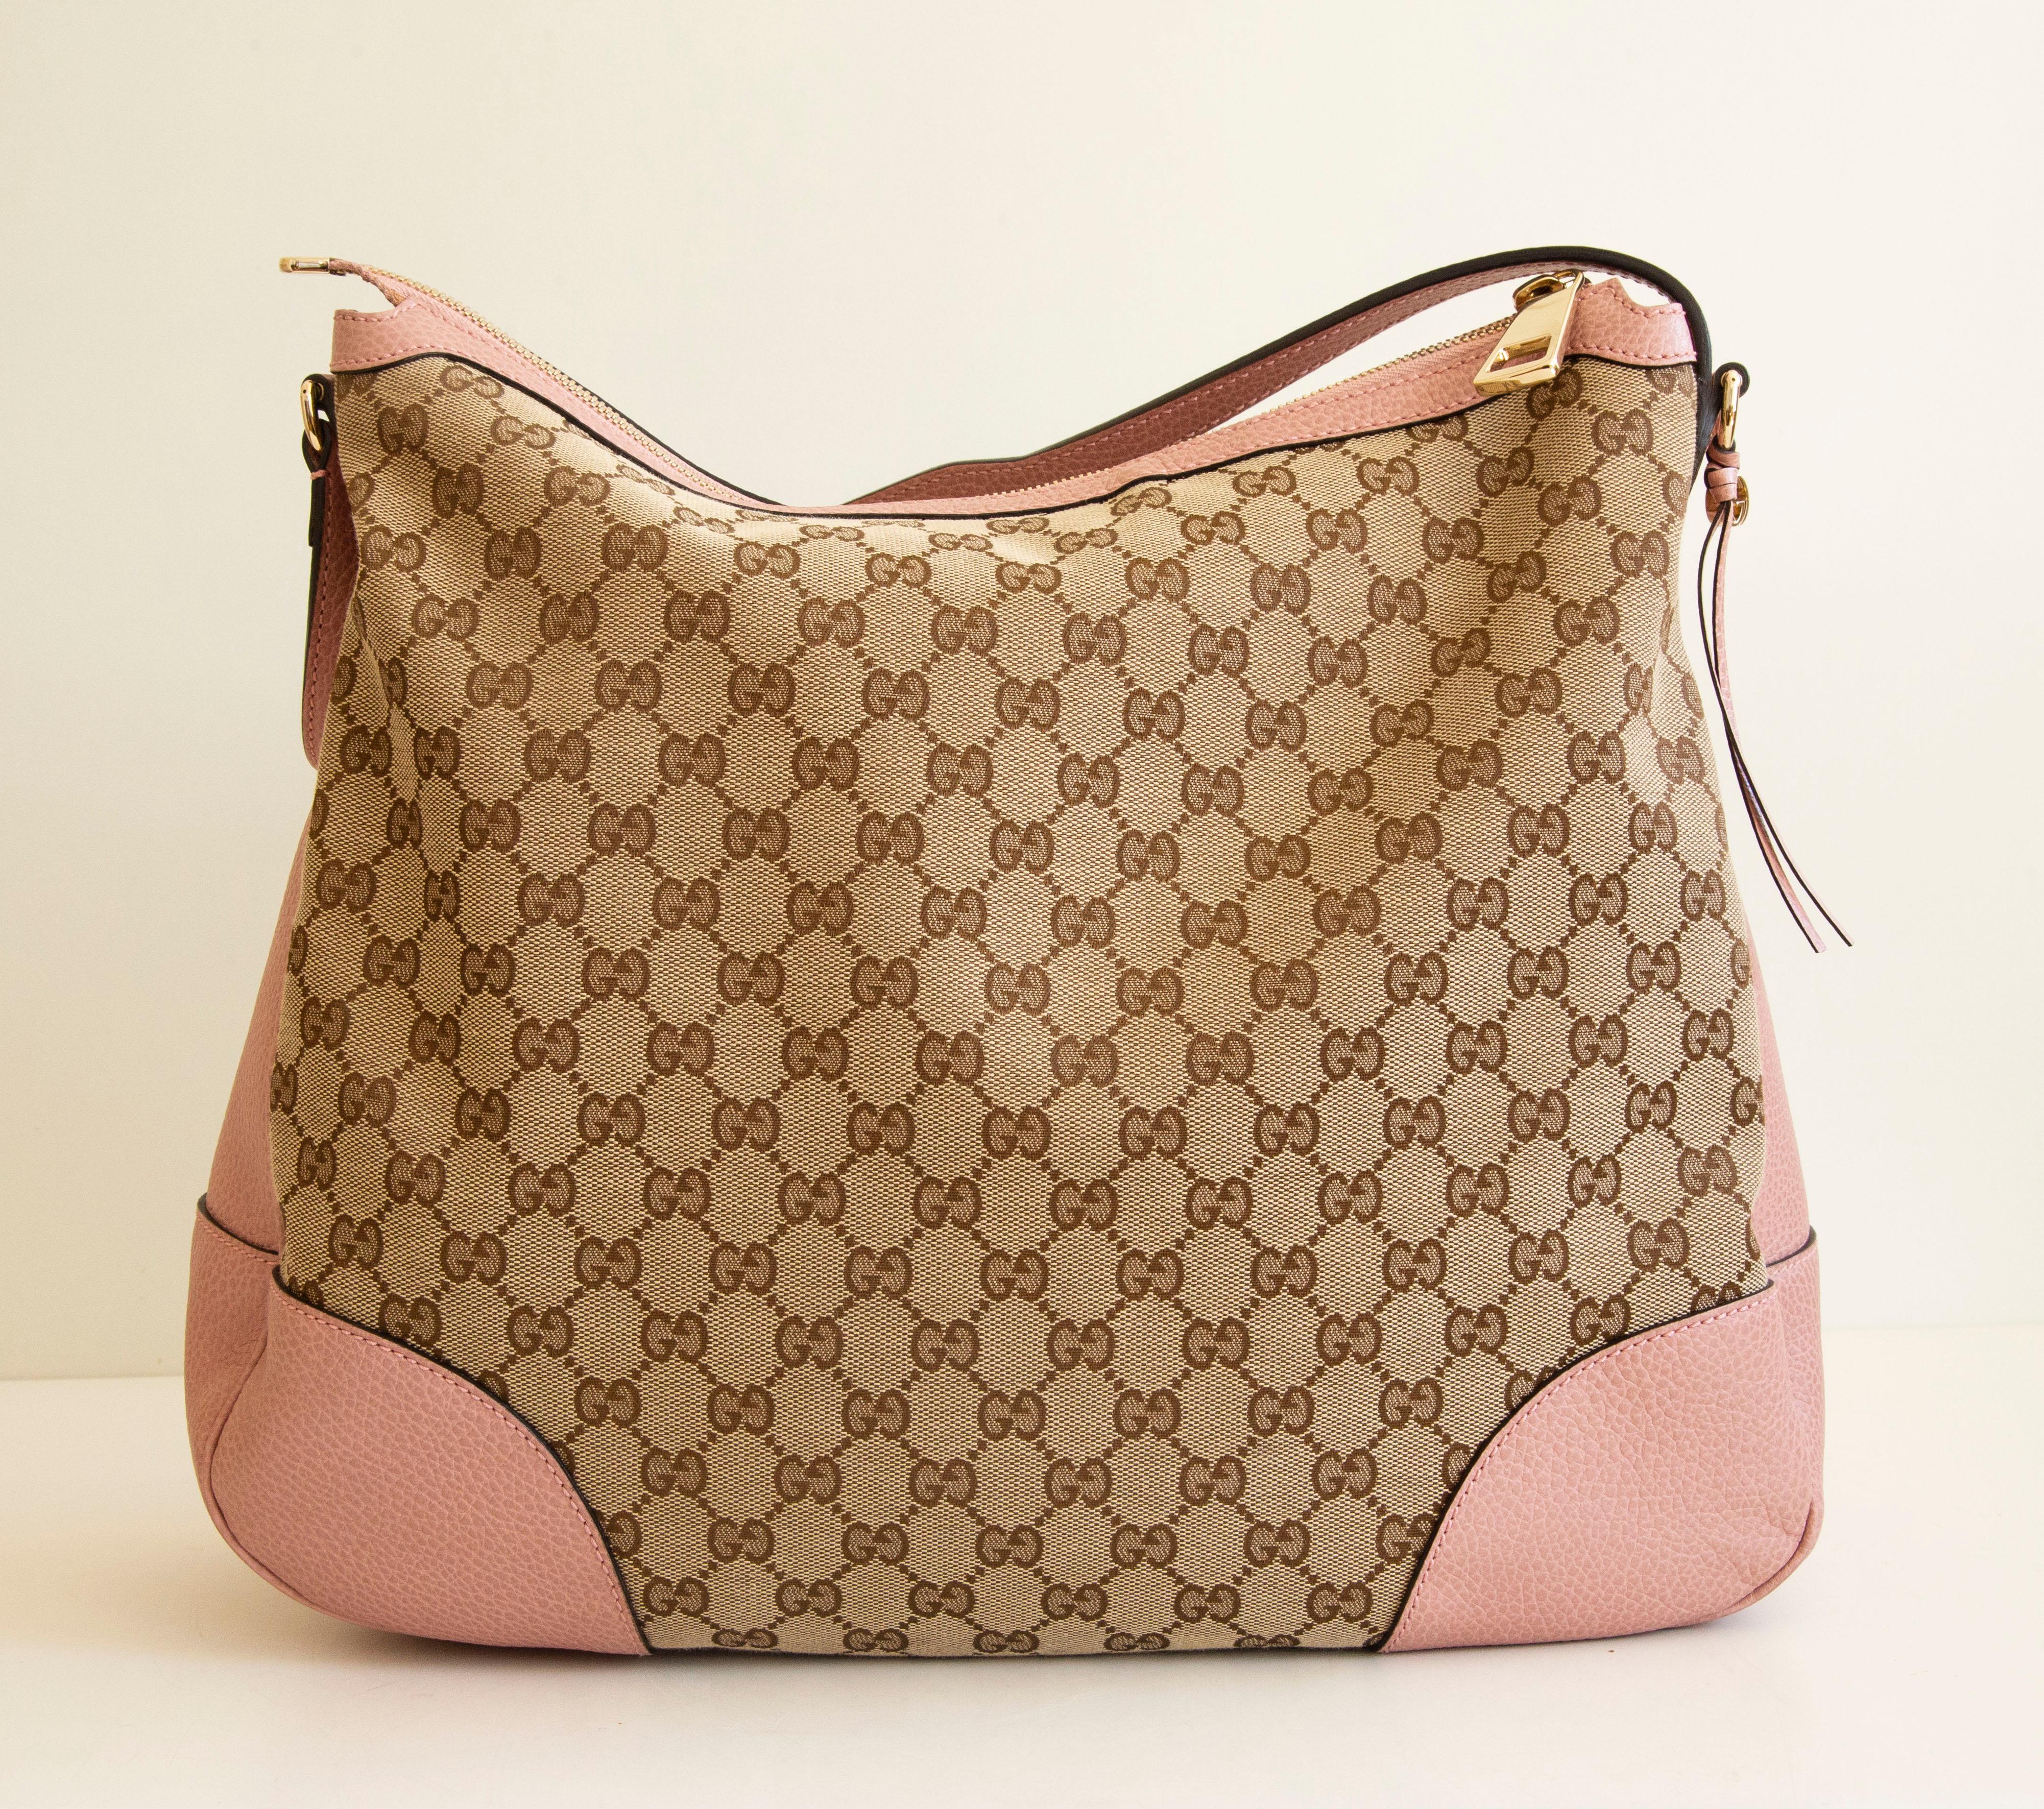 An authentic Gucci Bree shoulder bag/hobo bag. The bag features a GG canvas exterior, pink leather trim, and light-gold-toned hardware. The interior is lined with beige fabric and there are three side pockets, one zipped pocket, and two slip